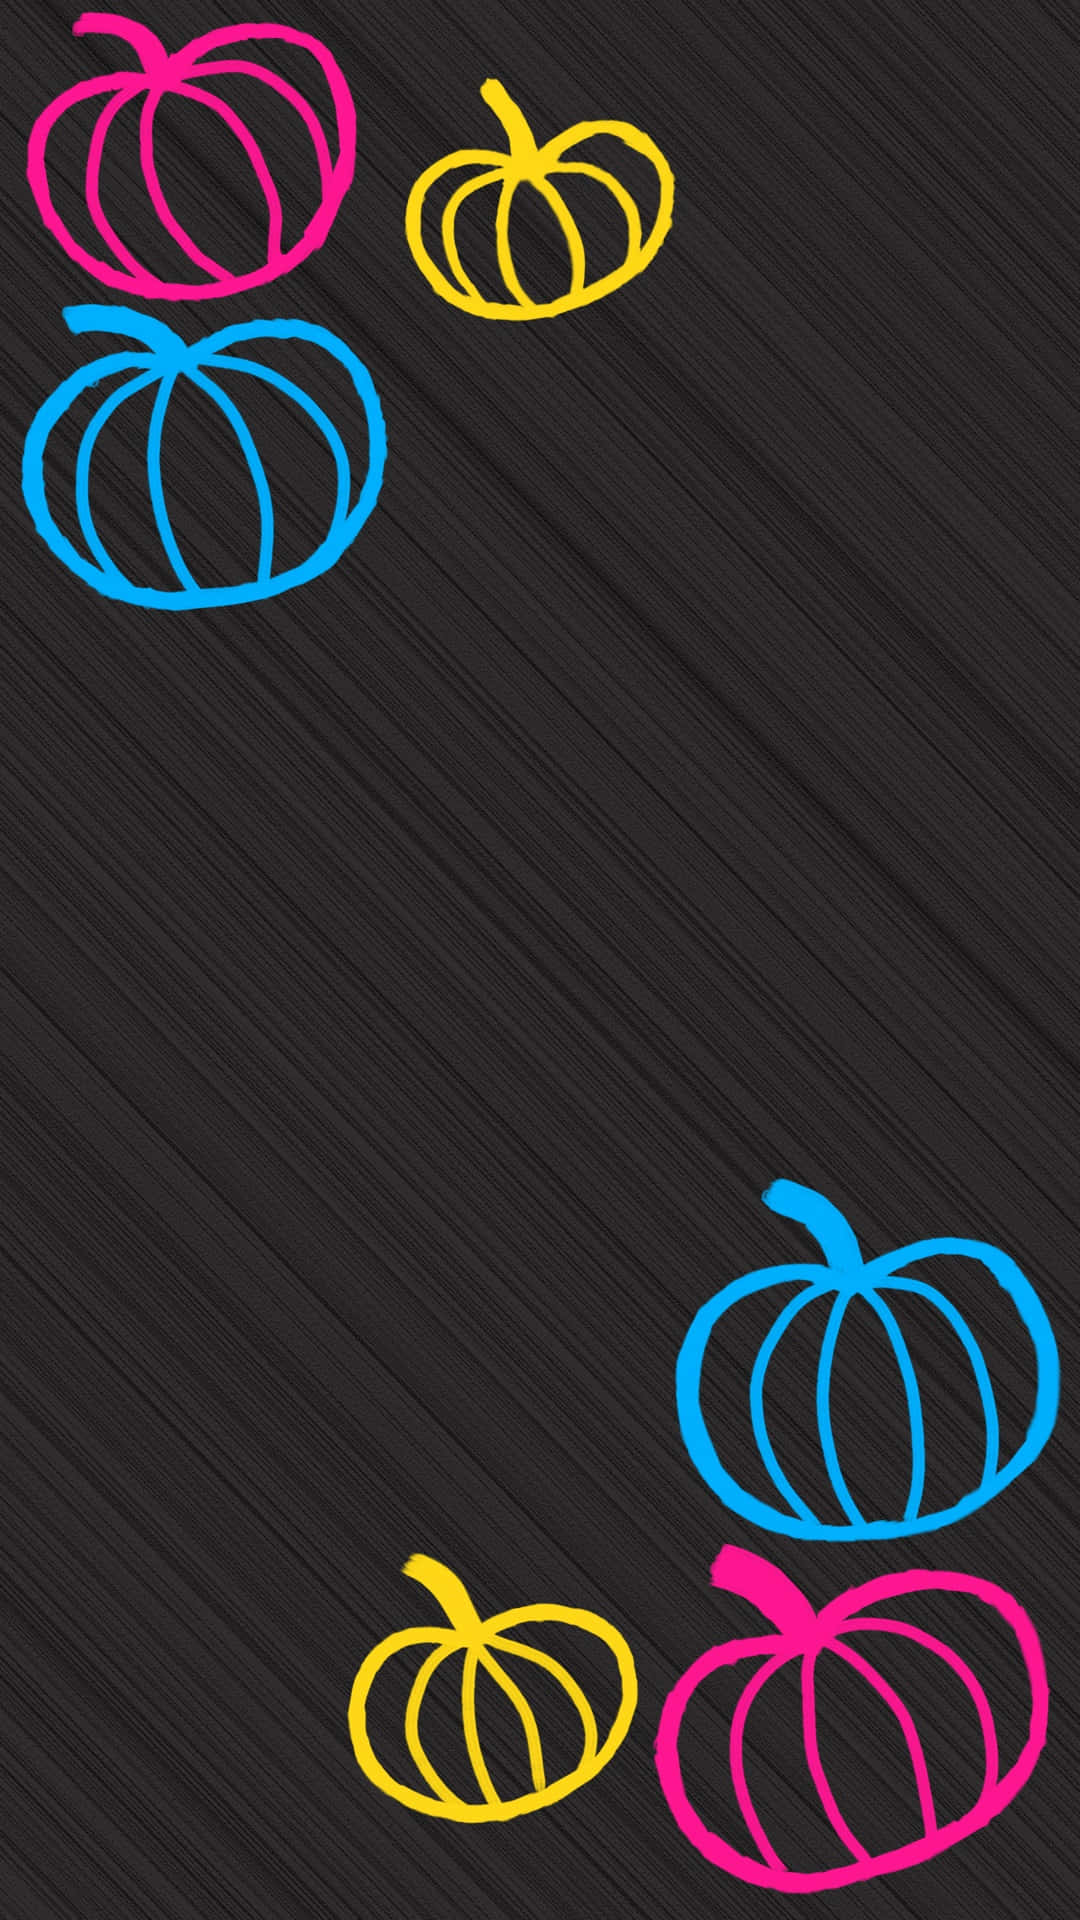 A Black Background With Colorful Pumpkins On It